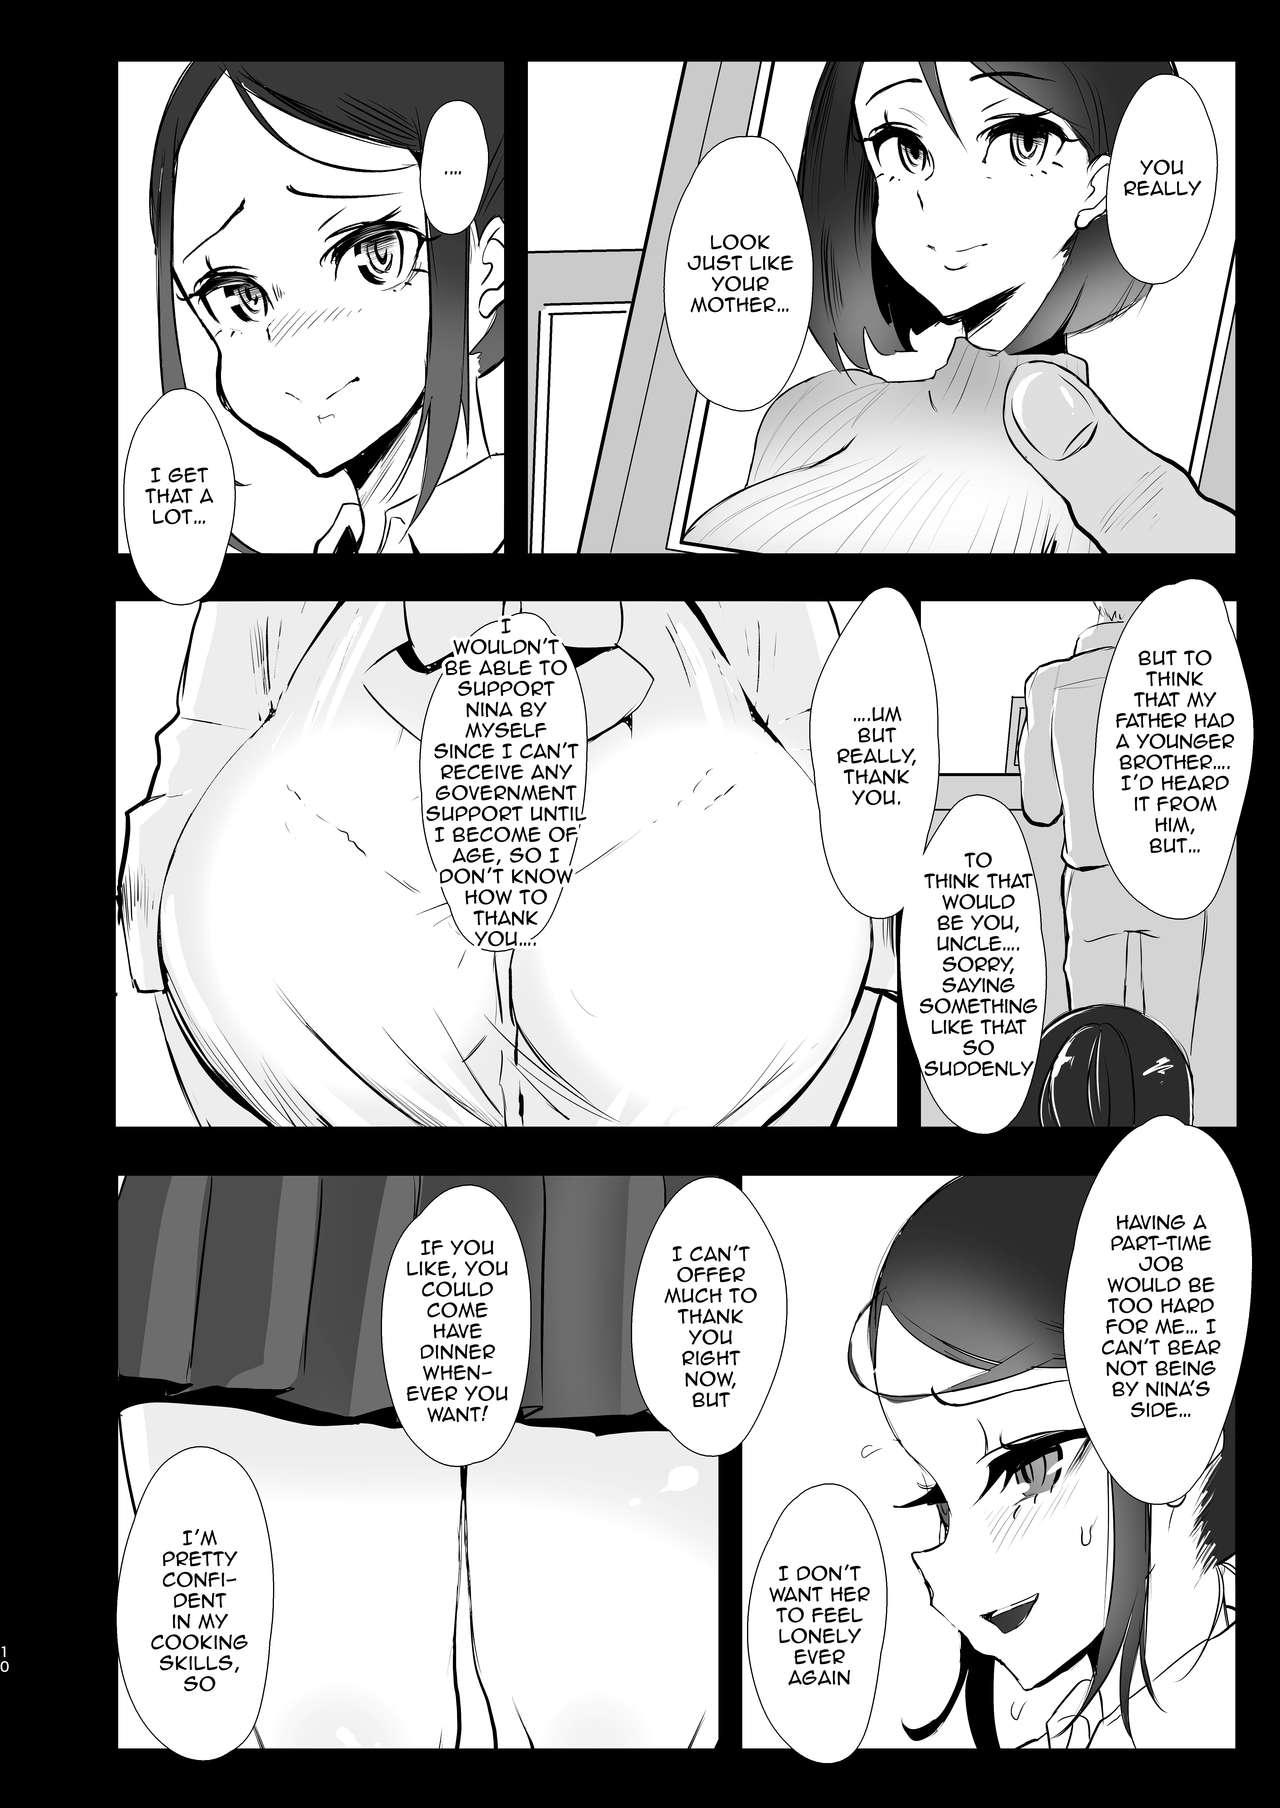 Wrestling Himawari no Kage | The Other Side of the Sunflower - Original Real Couple - Page 9